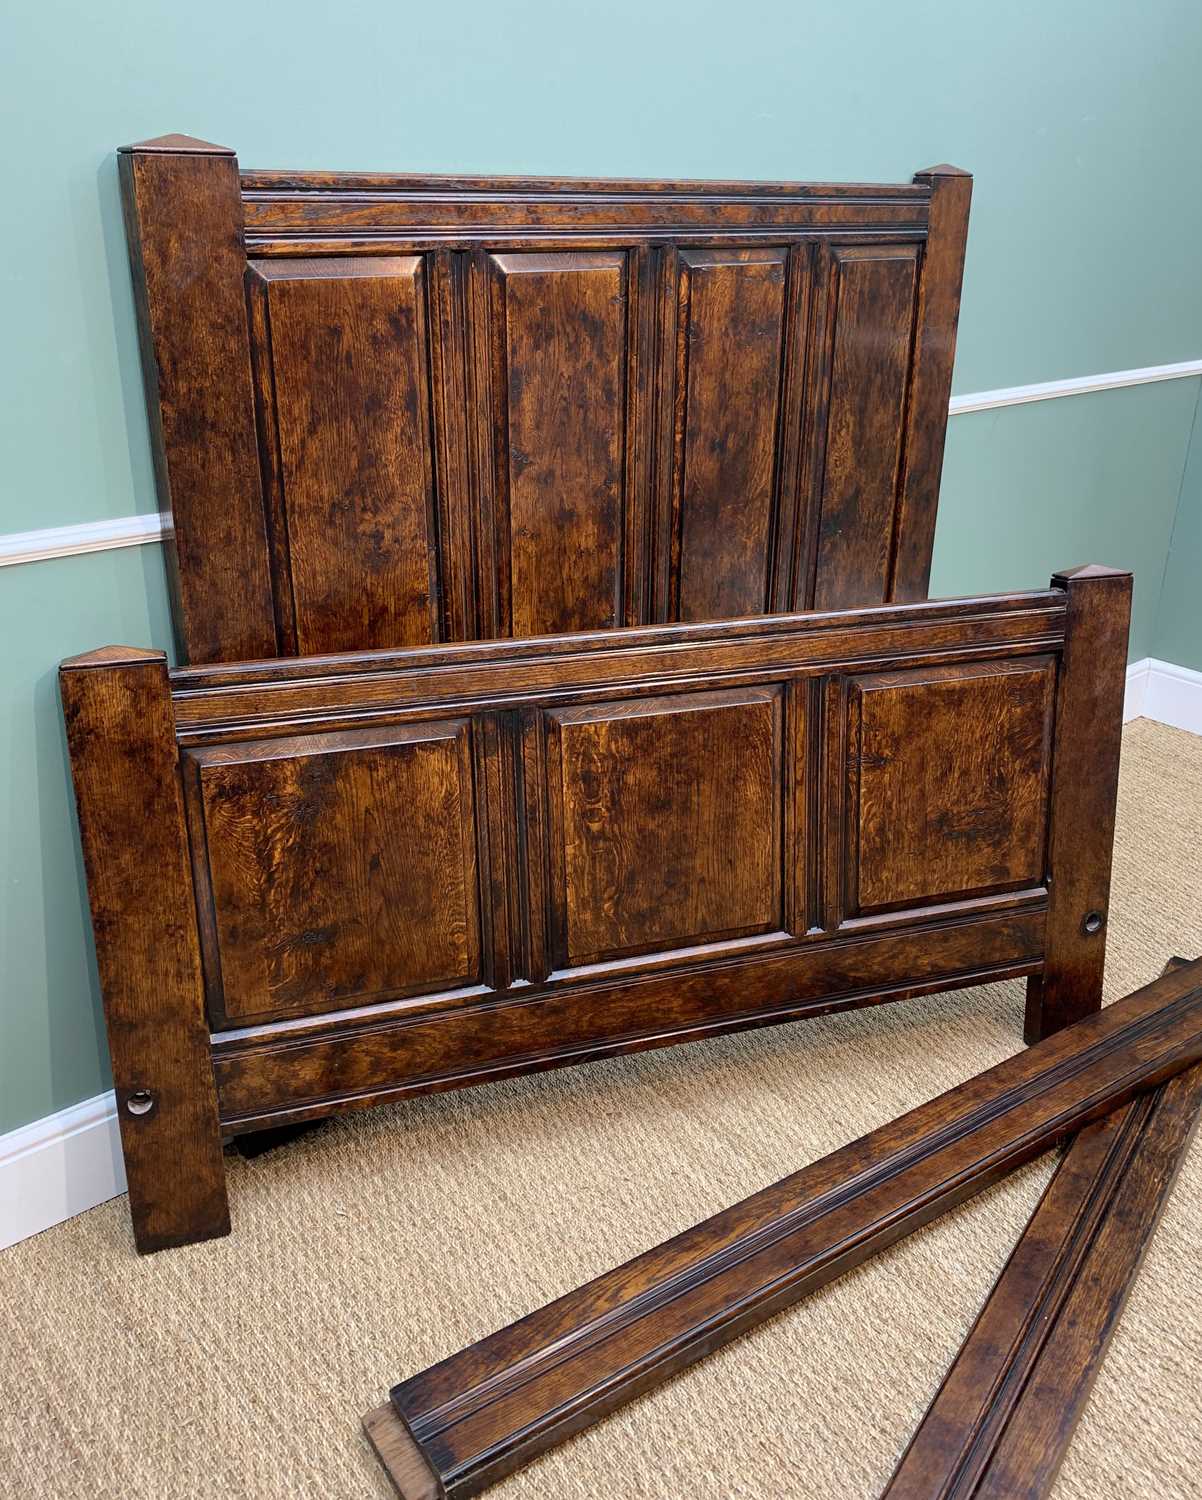 BYLAW REPRODUCTION STAINED OAK PANELLED DOUBLE BED in the 17th Century style, head board, foot board - Image 2 of 3